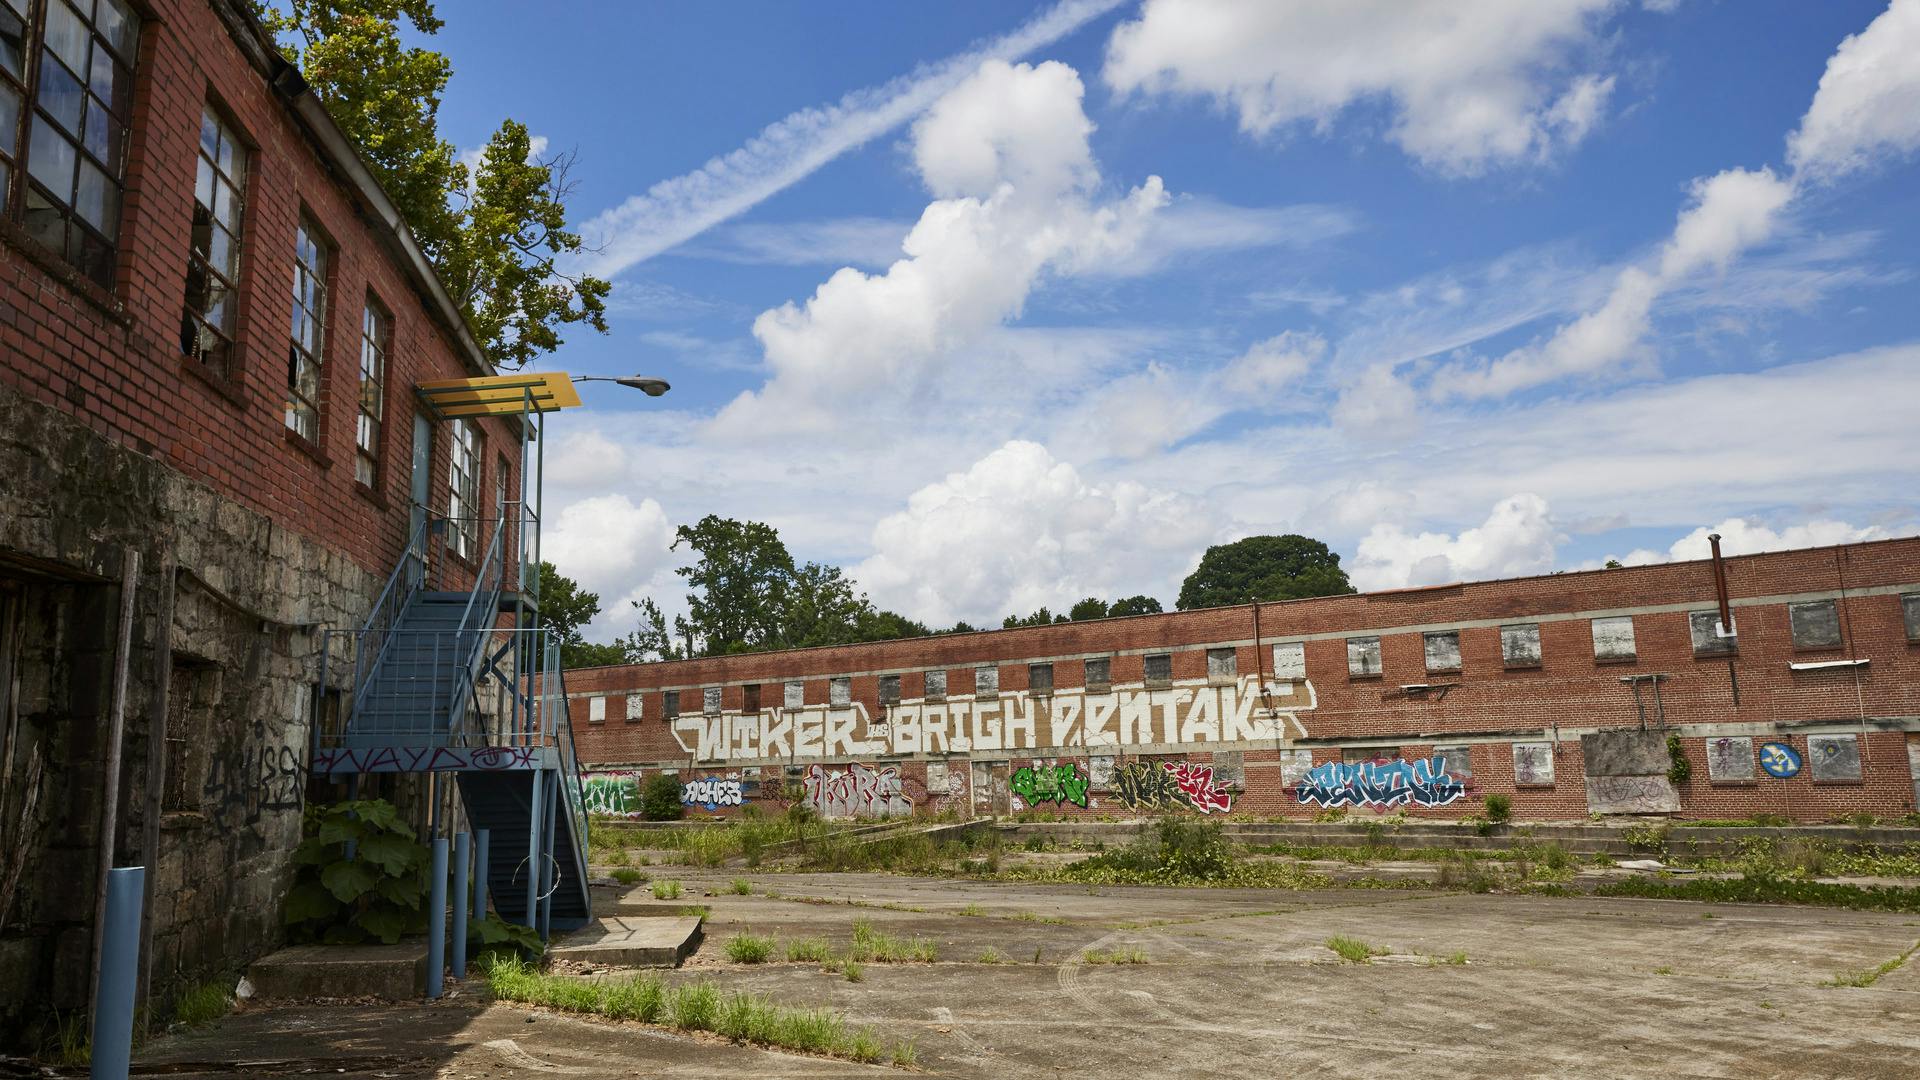 Two abandoned warehouse buildings are shown covered in colorful graffiti.